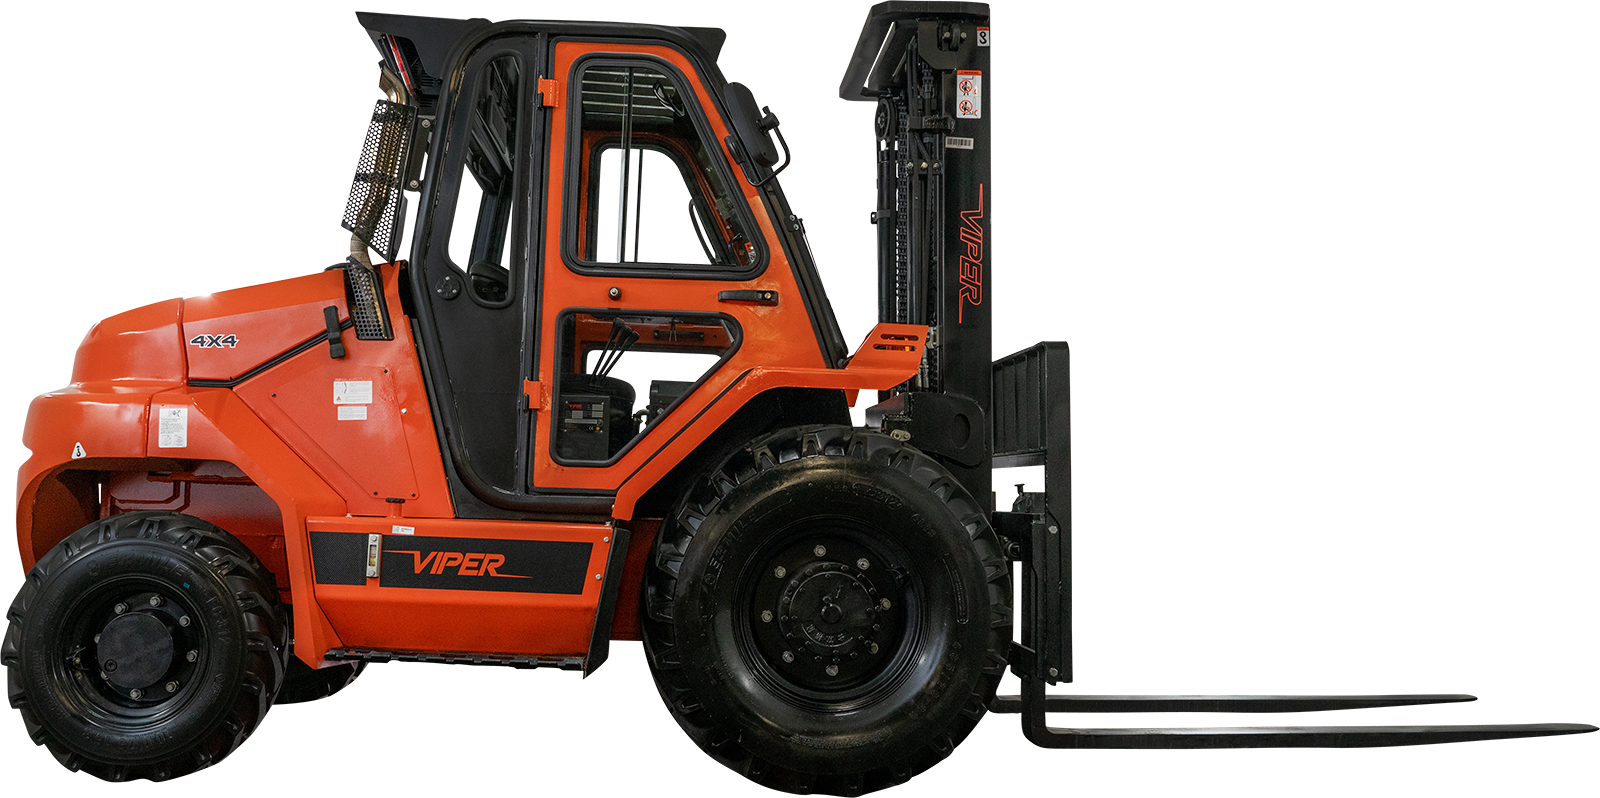 Rt80 Viper Lift Trucks New Quality Forklifts Viper Lift Trucks Inc Has Been Providing North America And Beyond With The Highest Quality Forklifts